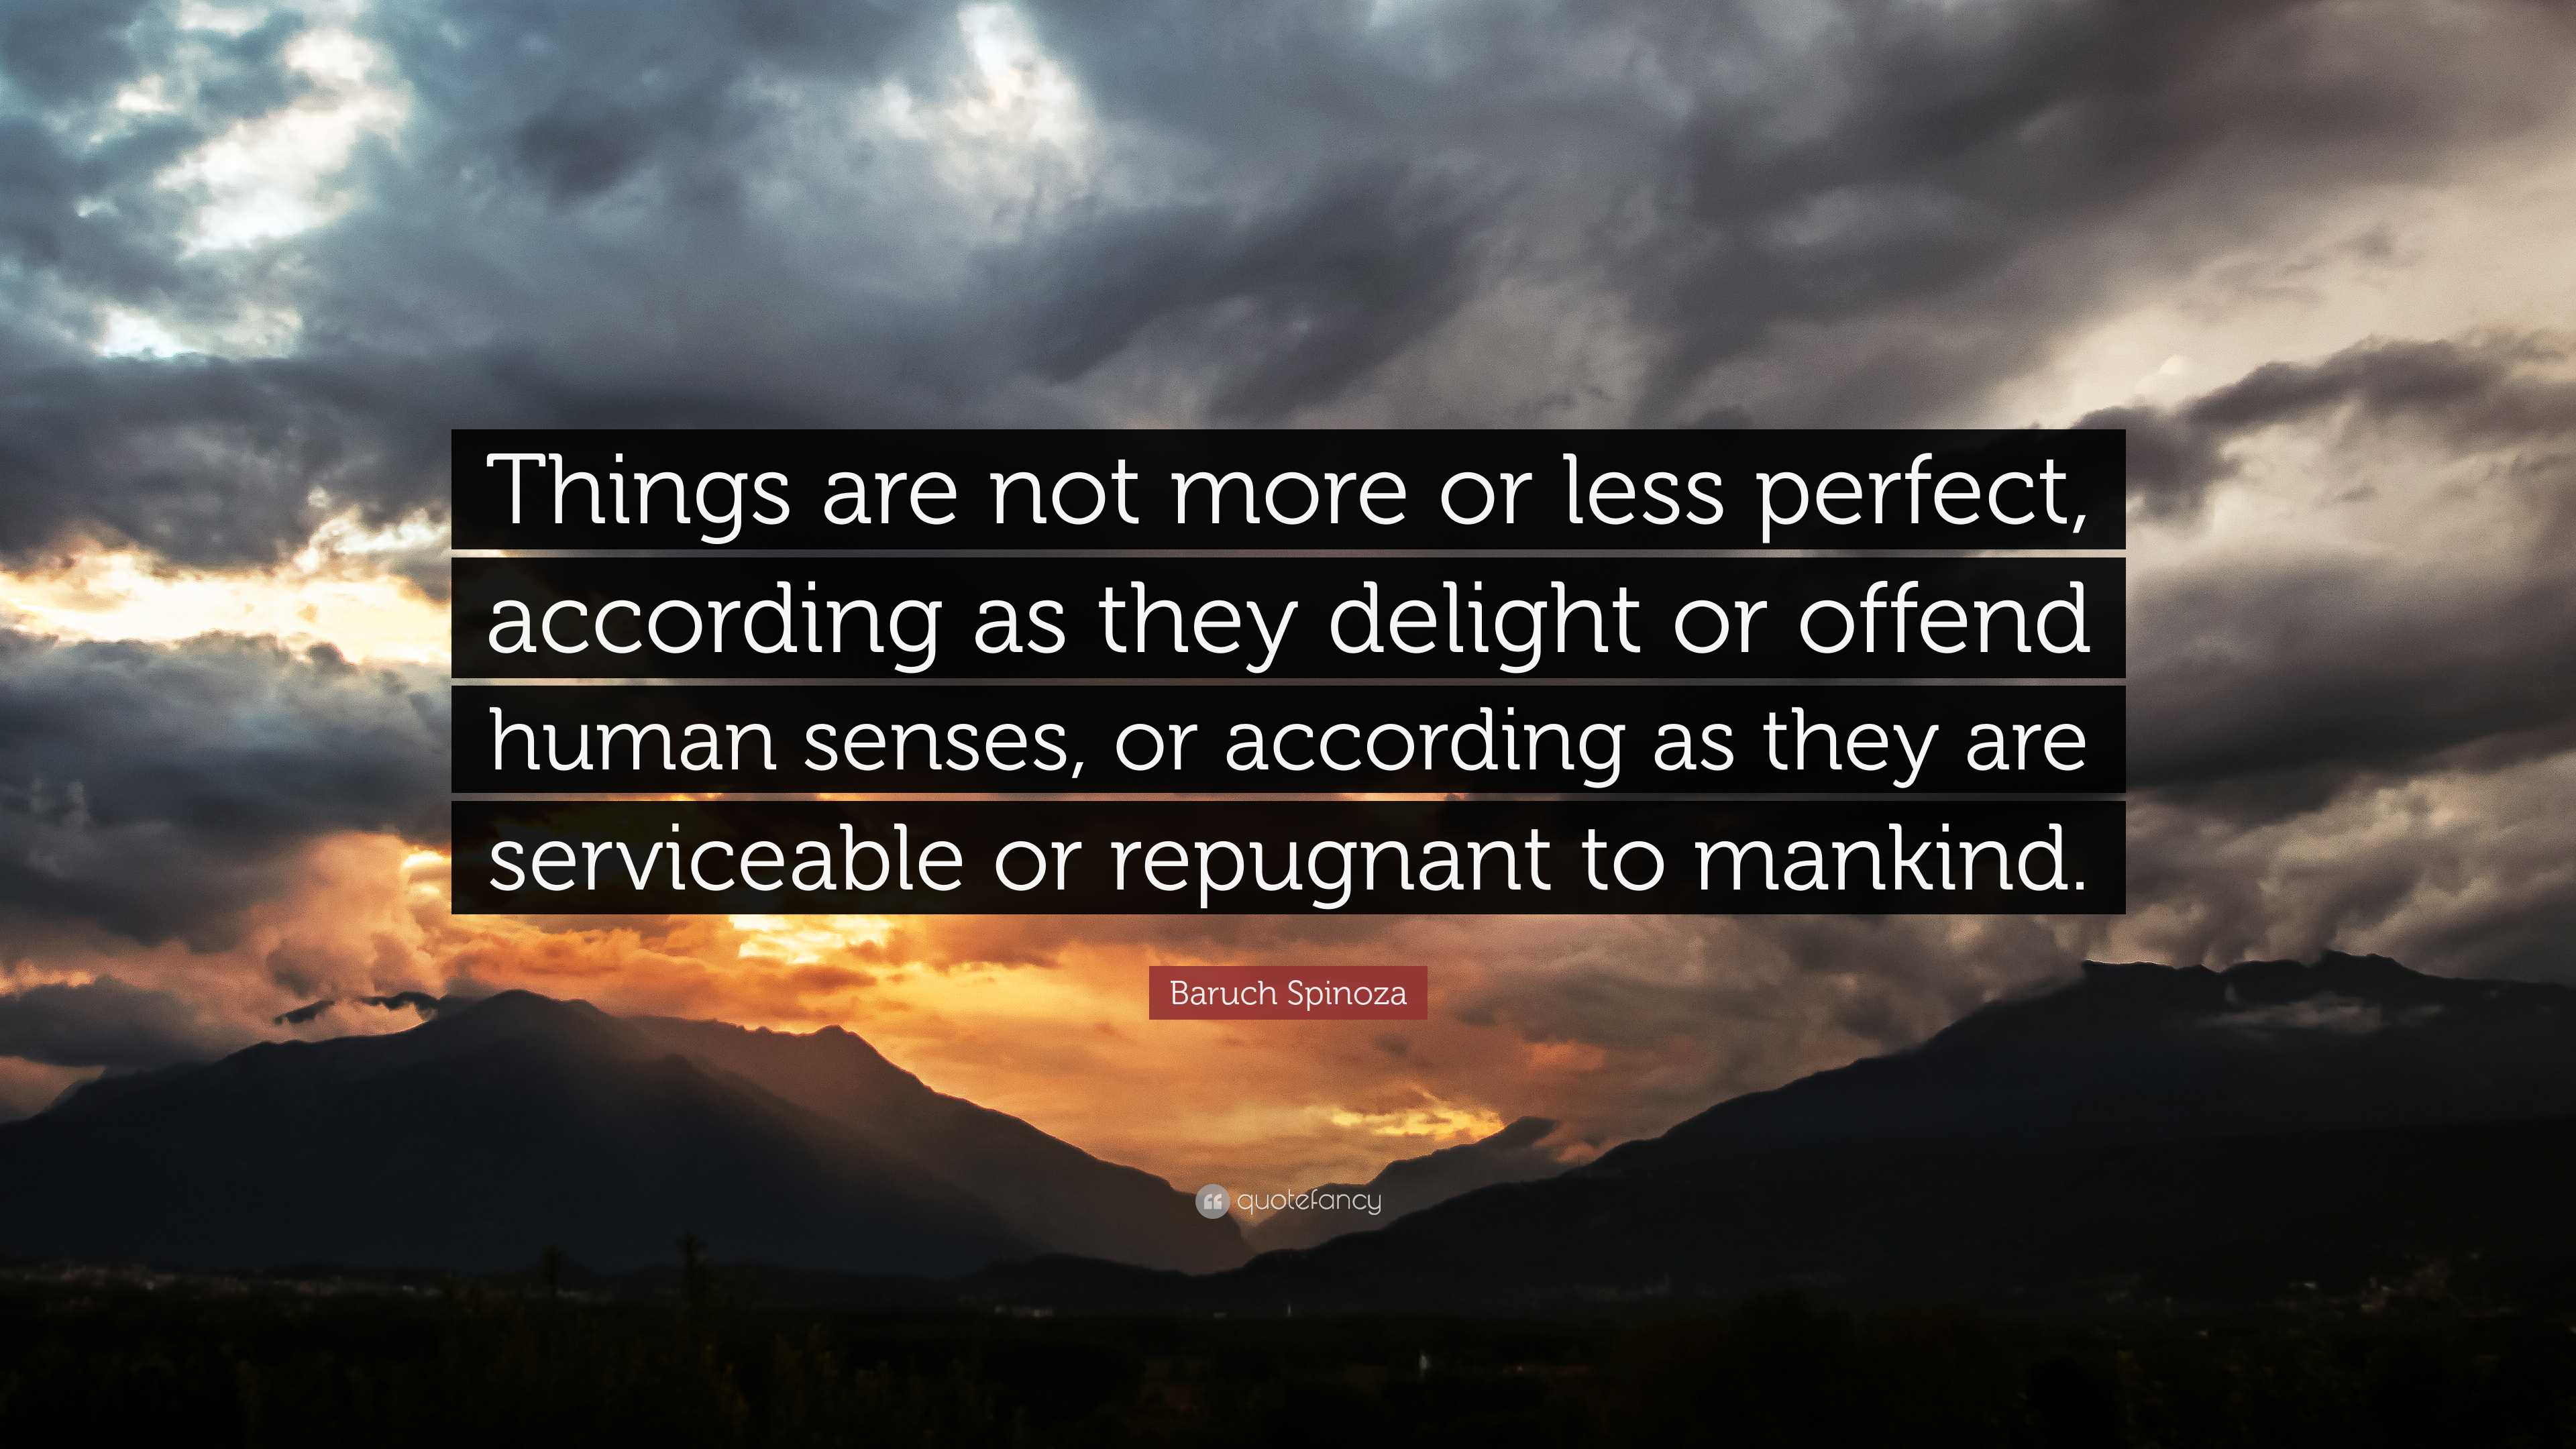 Baruch Spinoza Quote: “Things are not more or less perfect, according ...